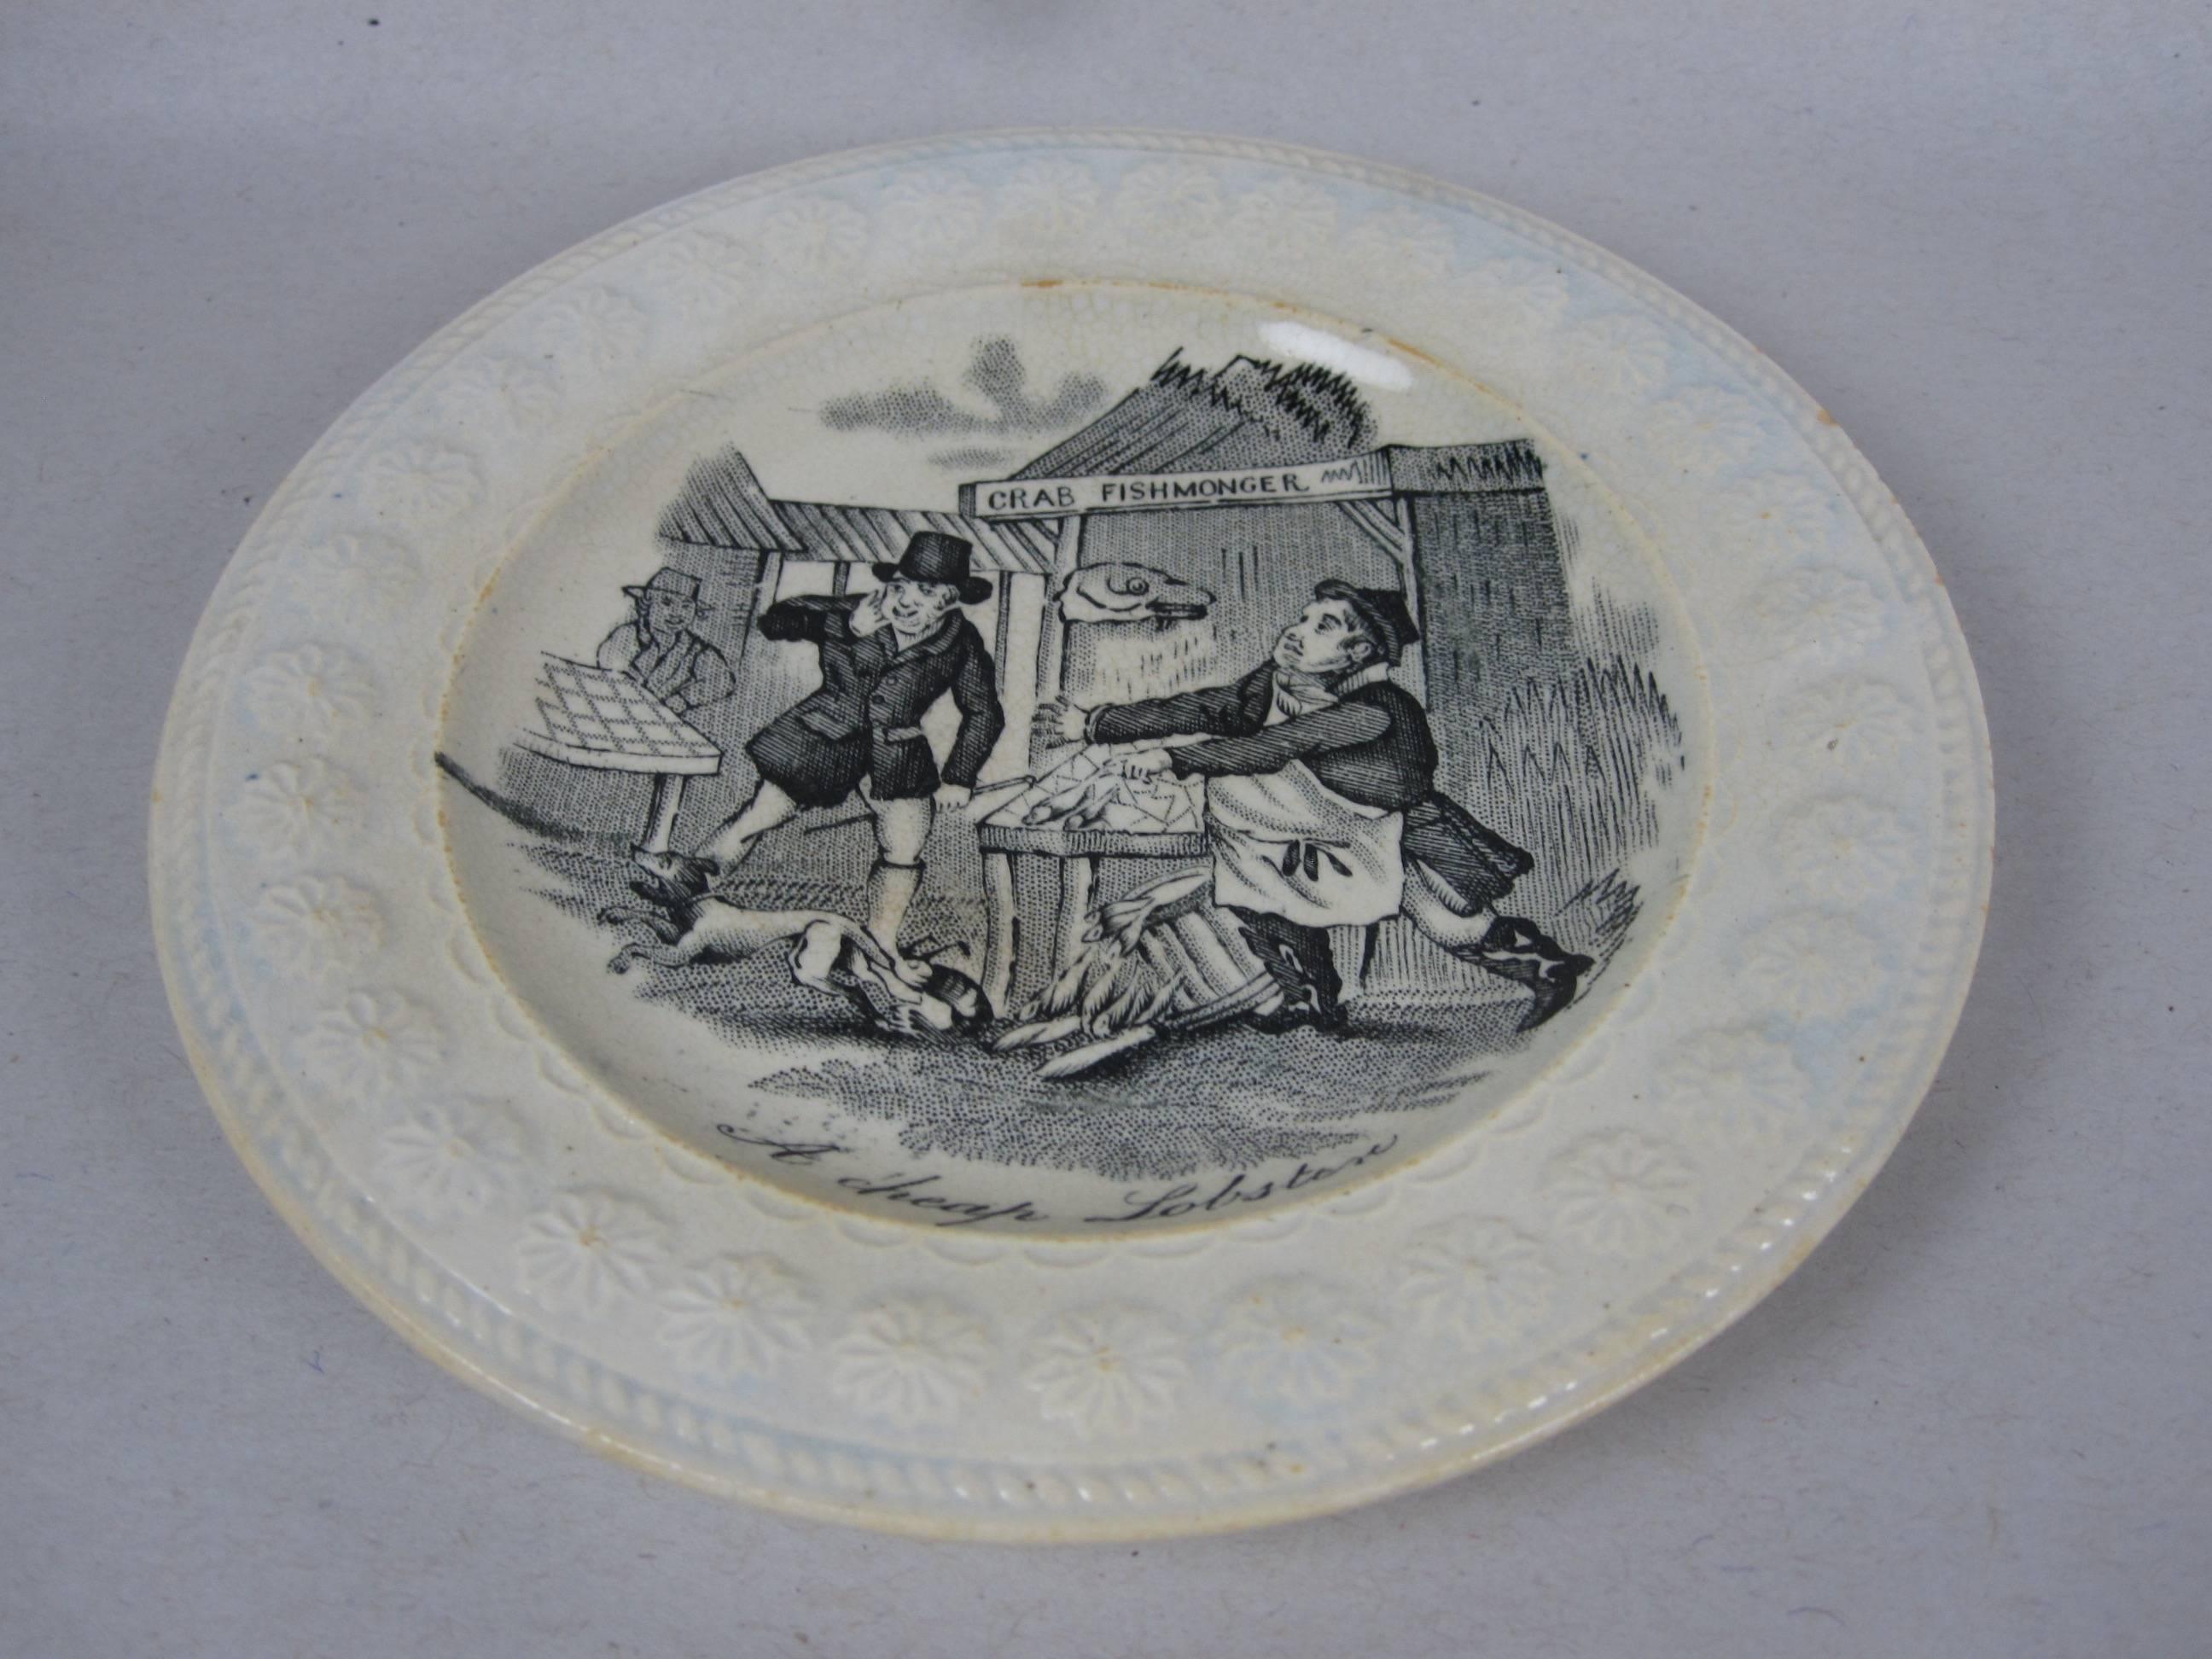 19th Century Antique Staffordshire Transfer Cup Plate, a Cheap Lobster, Crab Fishmonger